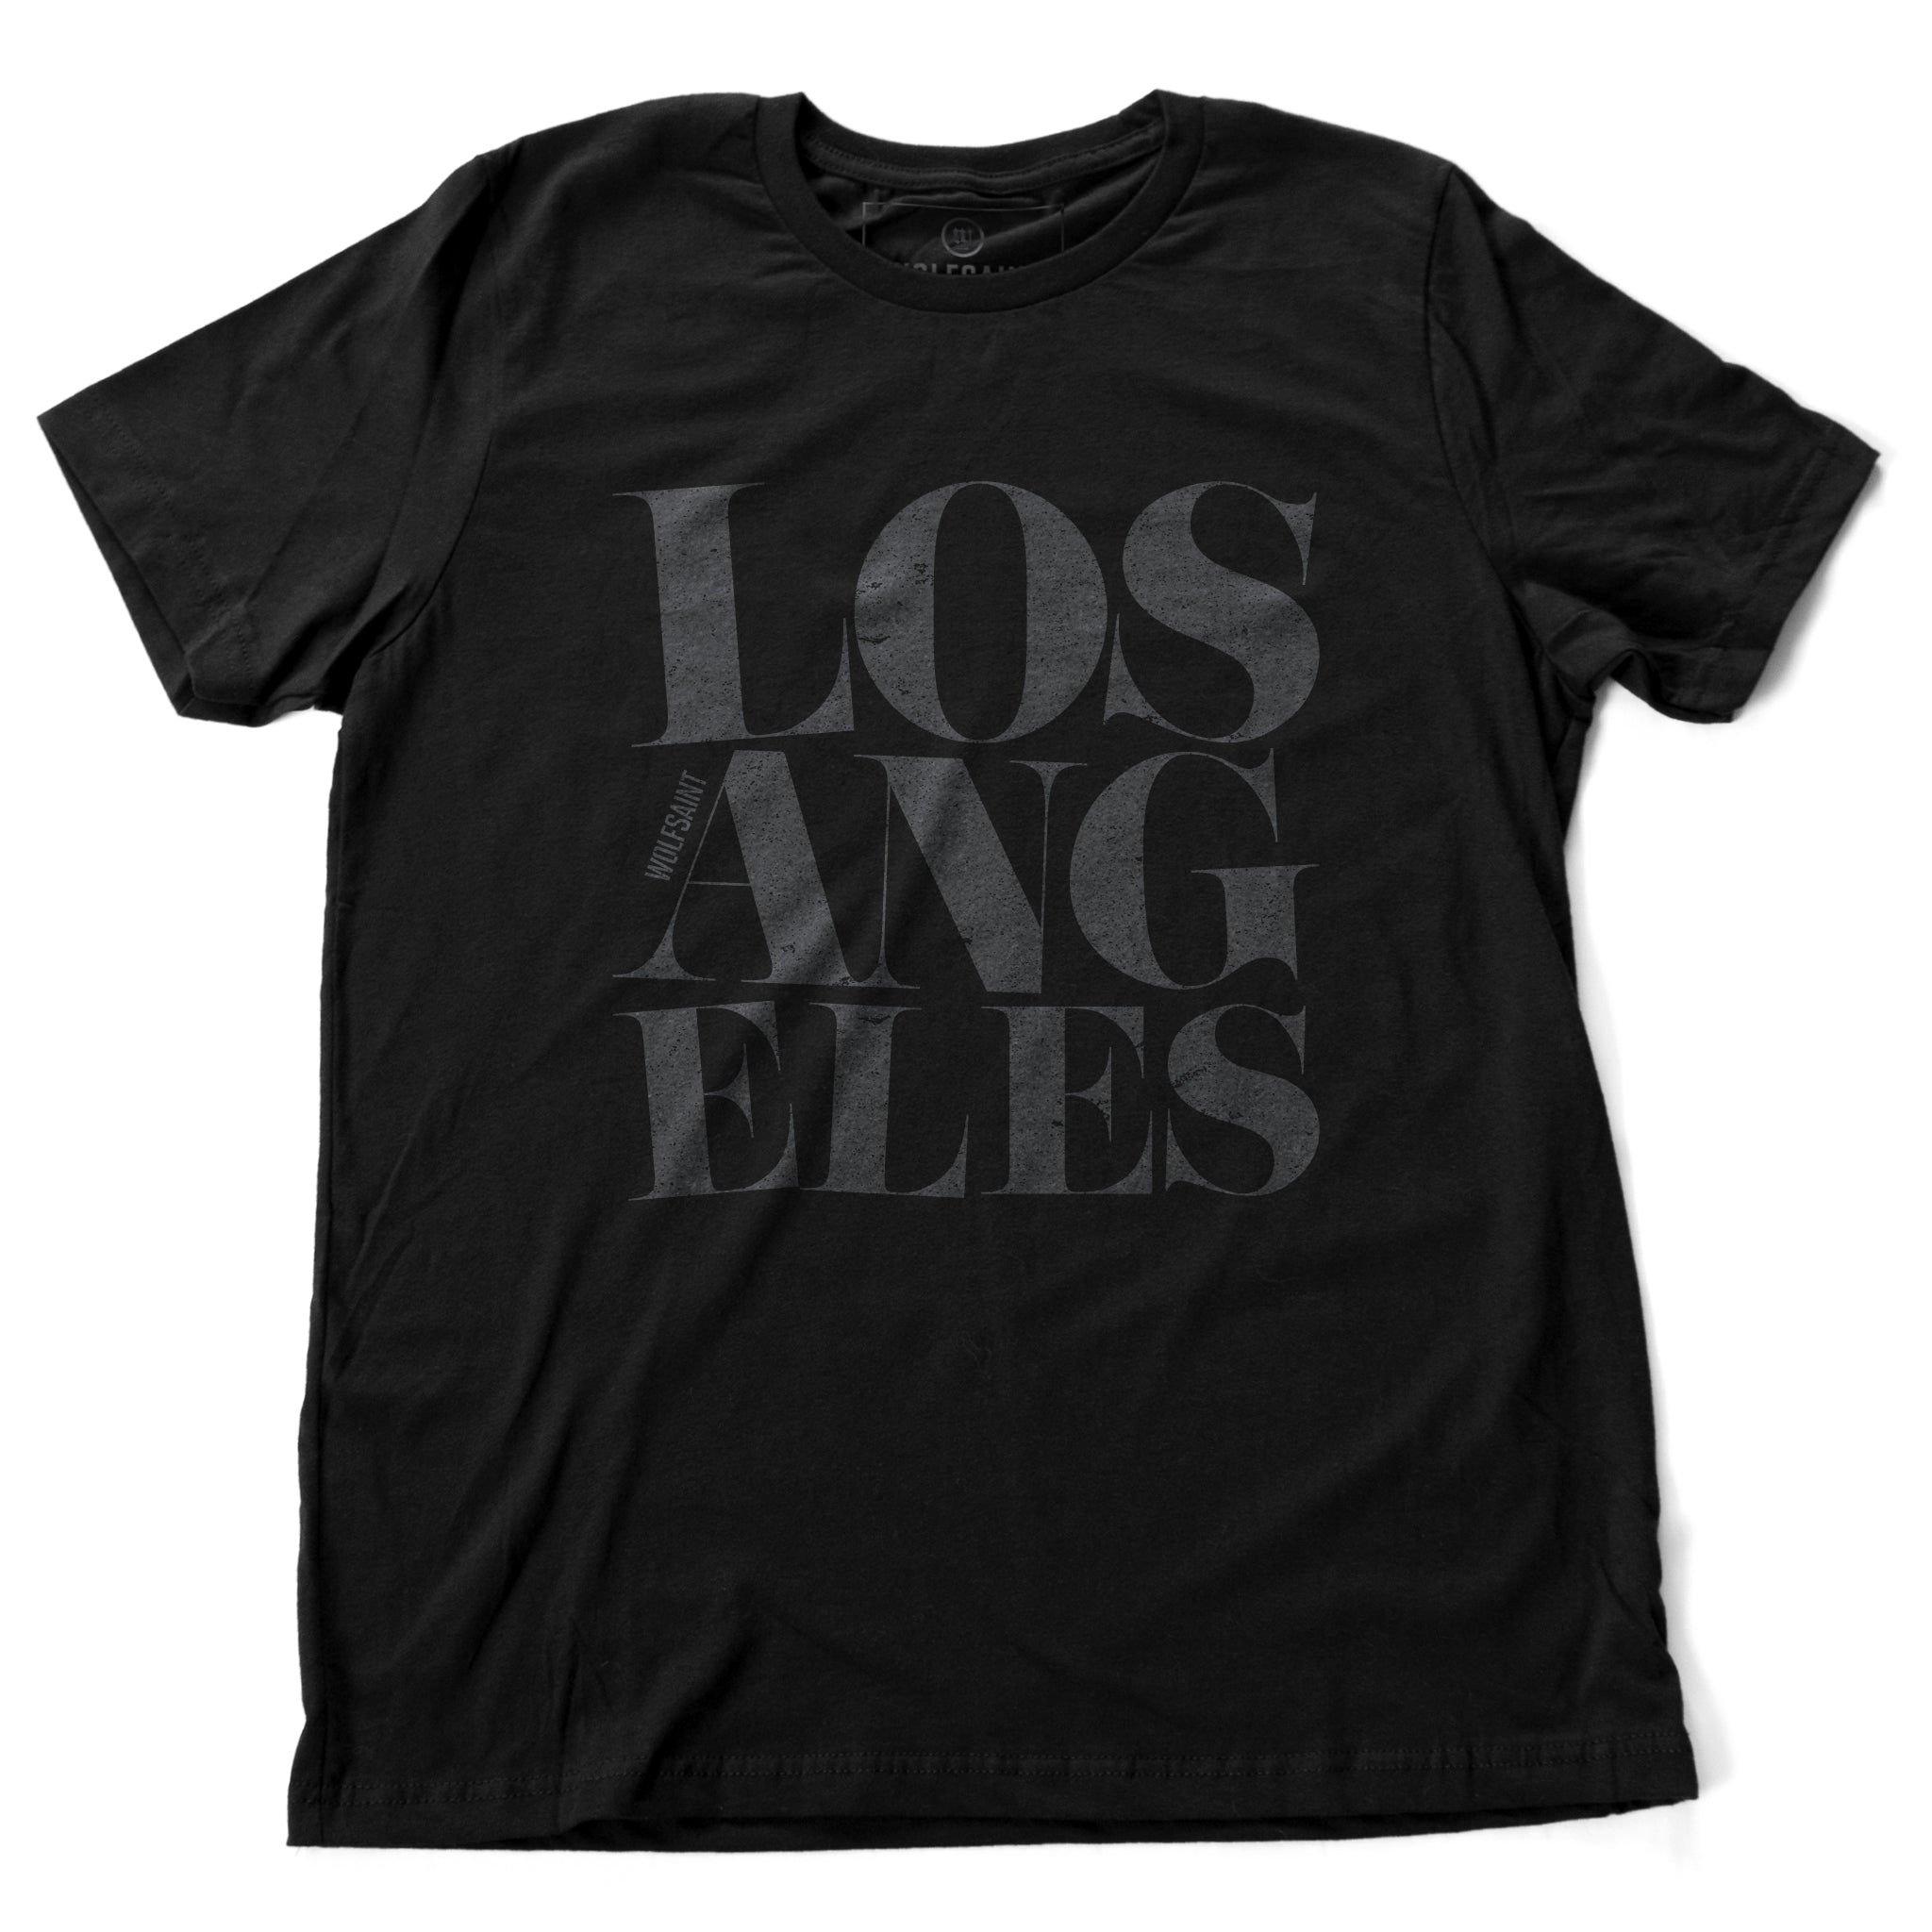 A fashionable black graphic t-shirt featuring the word “LOS ANGELES” in a elegant font, stacked in three tilted lines to sarcastically simulate an earthquake. From wolfsaint.net